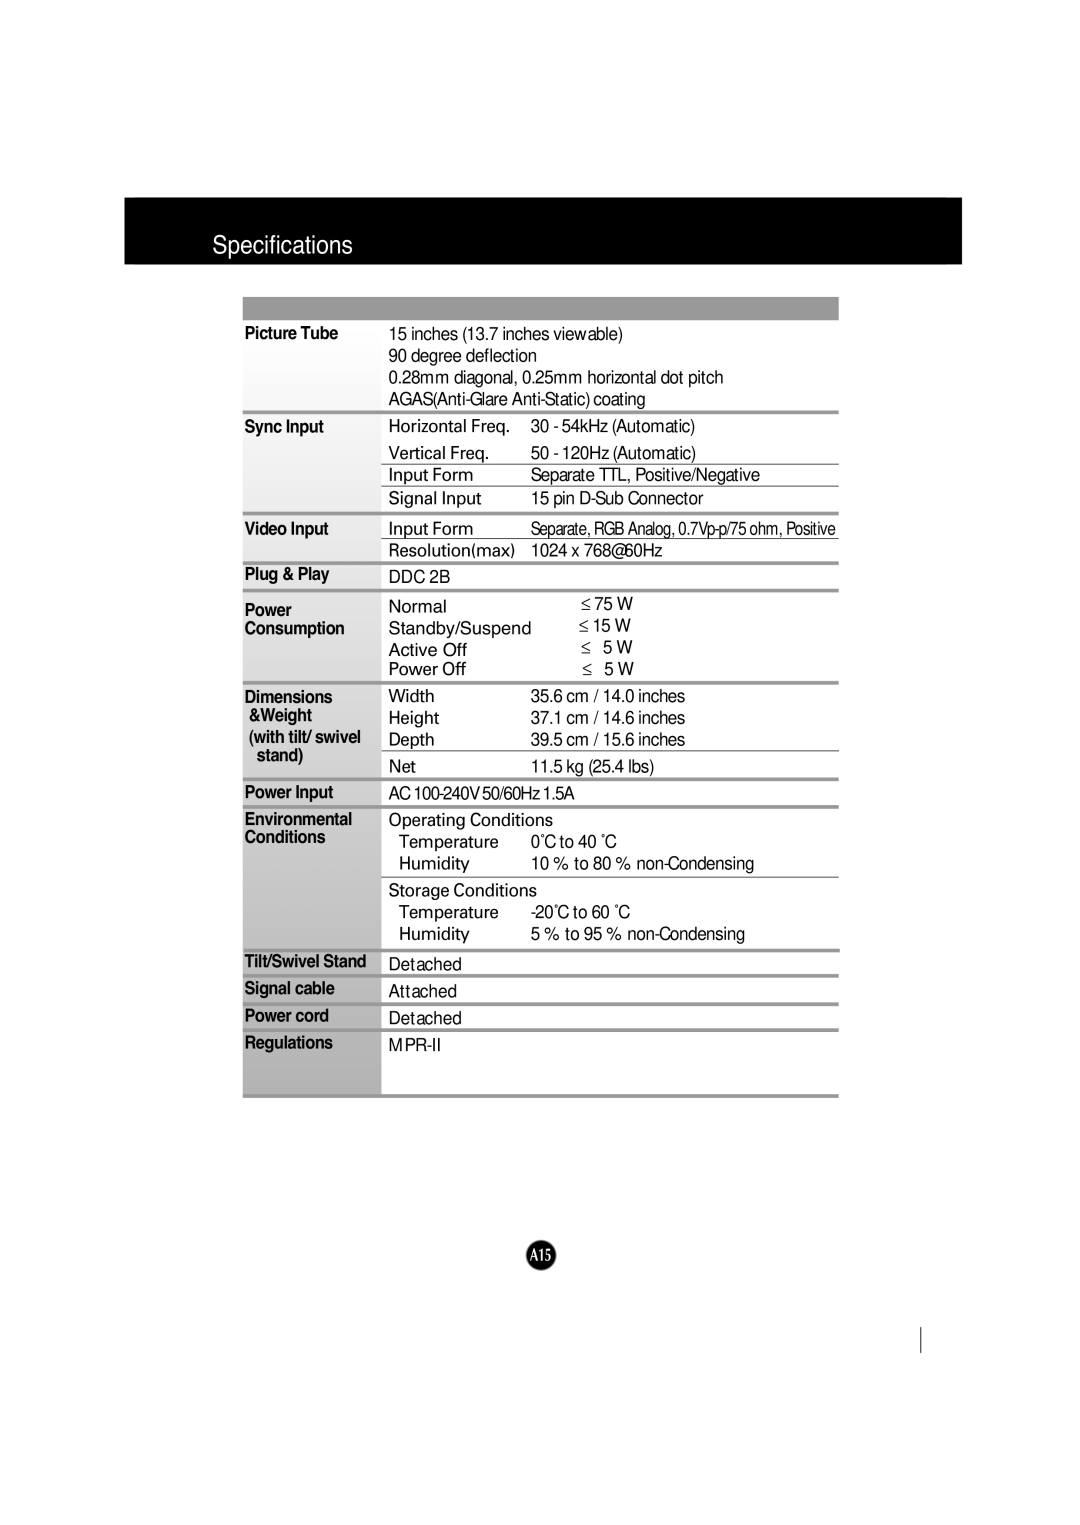 IBM 6518 - 4LE manual Specifications 